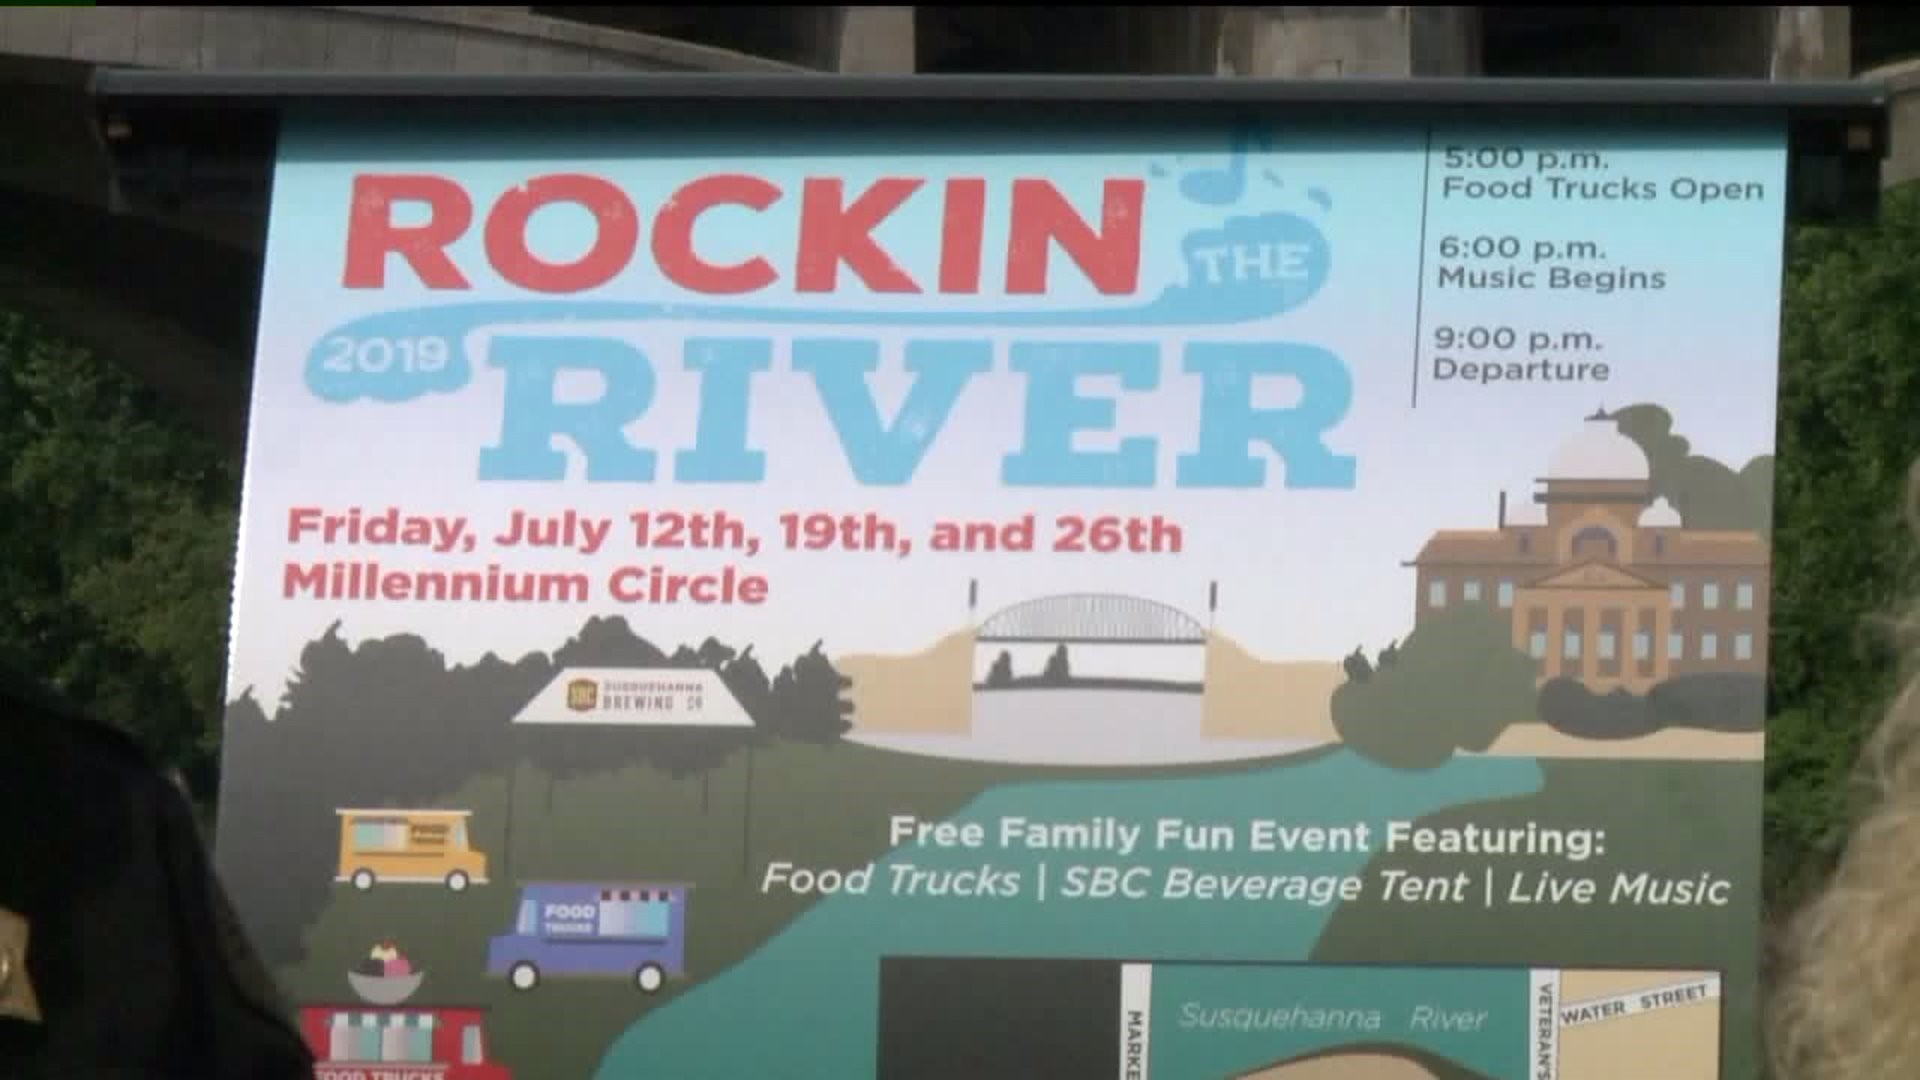 Free Concerts Planned along River in Wilkes-Barre